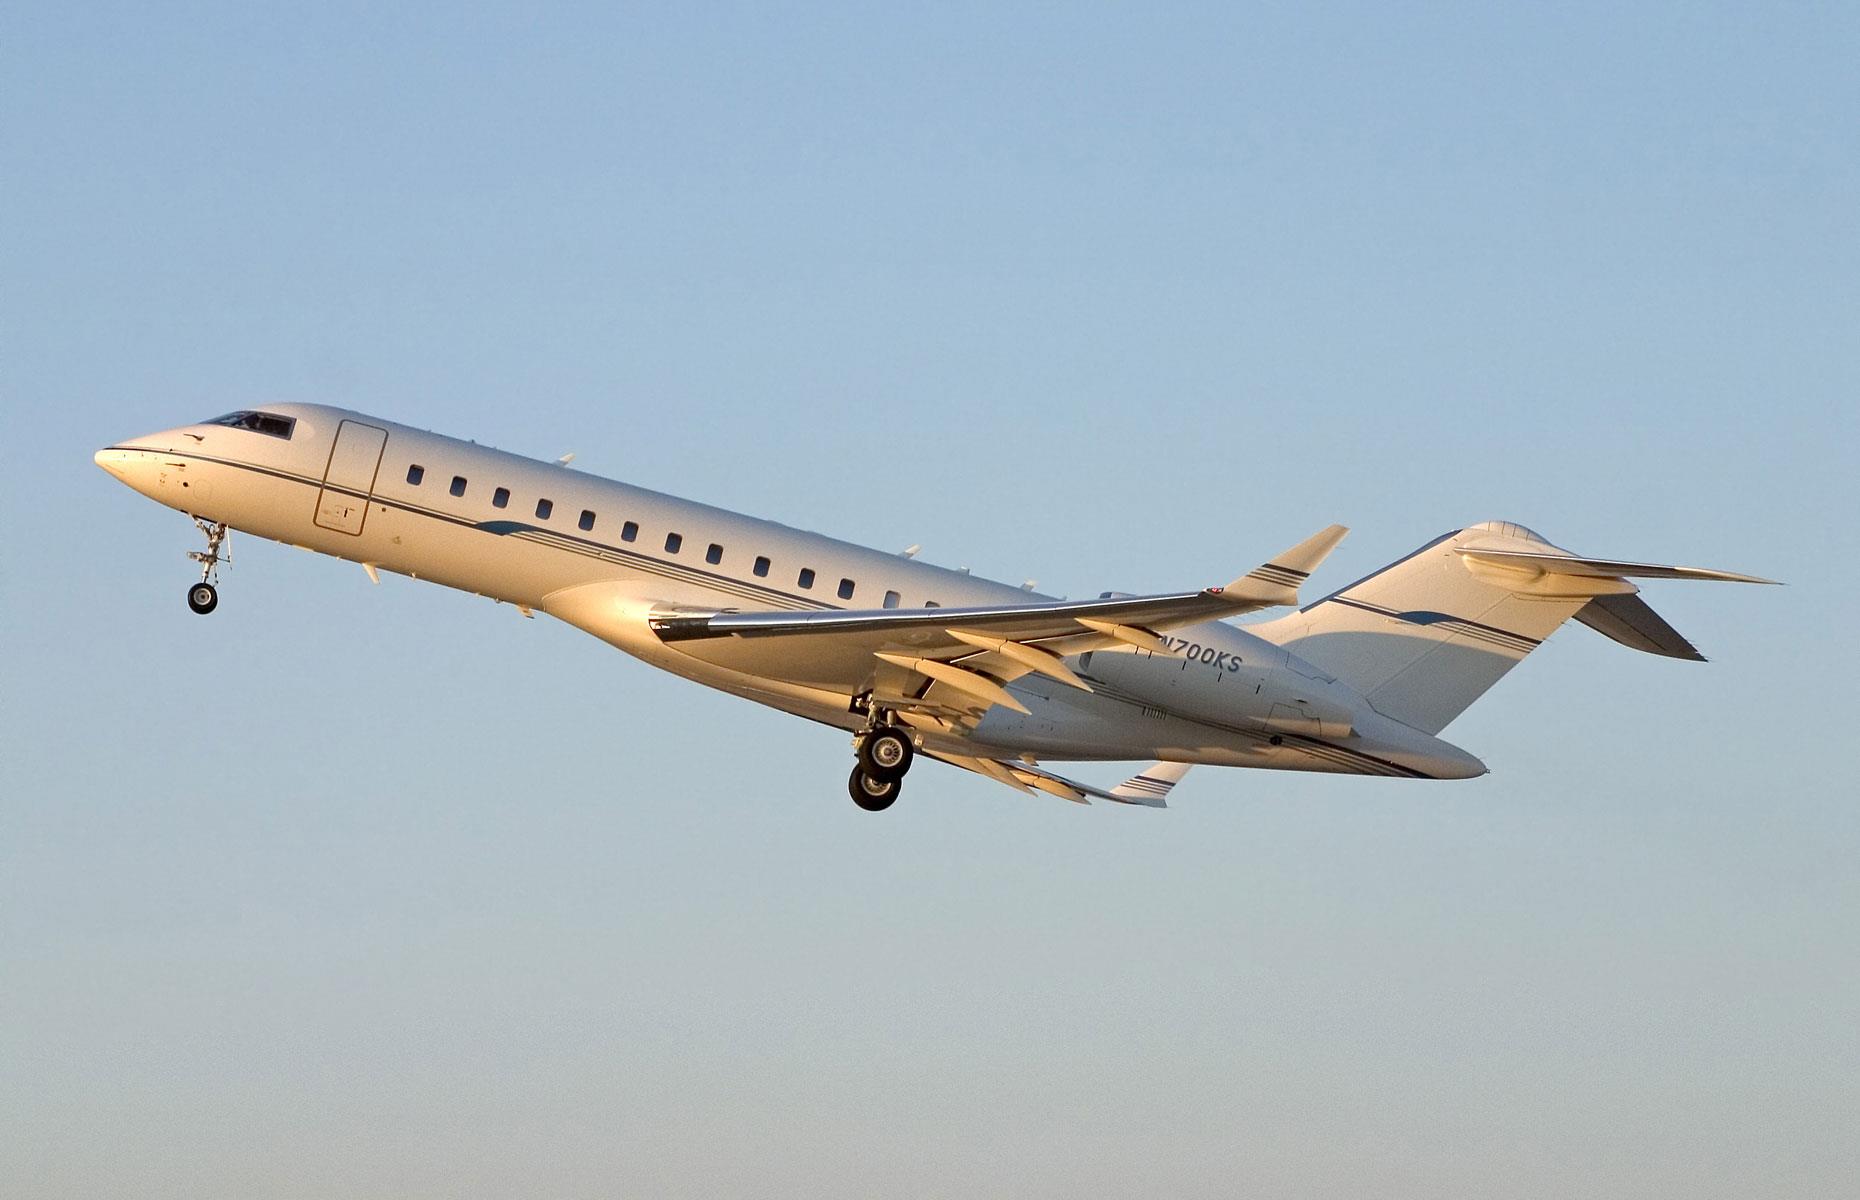 <p>While he is famed for his thrifty ways, Bill Gates does allow himself the occasional splurge and calls the Bombardier BD-700 Global Express private jet he bought in 1997 his “guilty pleasure”. According to the <em>New York Times</em>, the Microsoft co-founder paid $21 million (£12.9m) for the plane, which can seat up to 19 people. Gates actually owns three more planes including two Gulfstream G650ERs, and a collection of helicopters.</p>